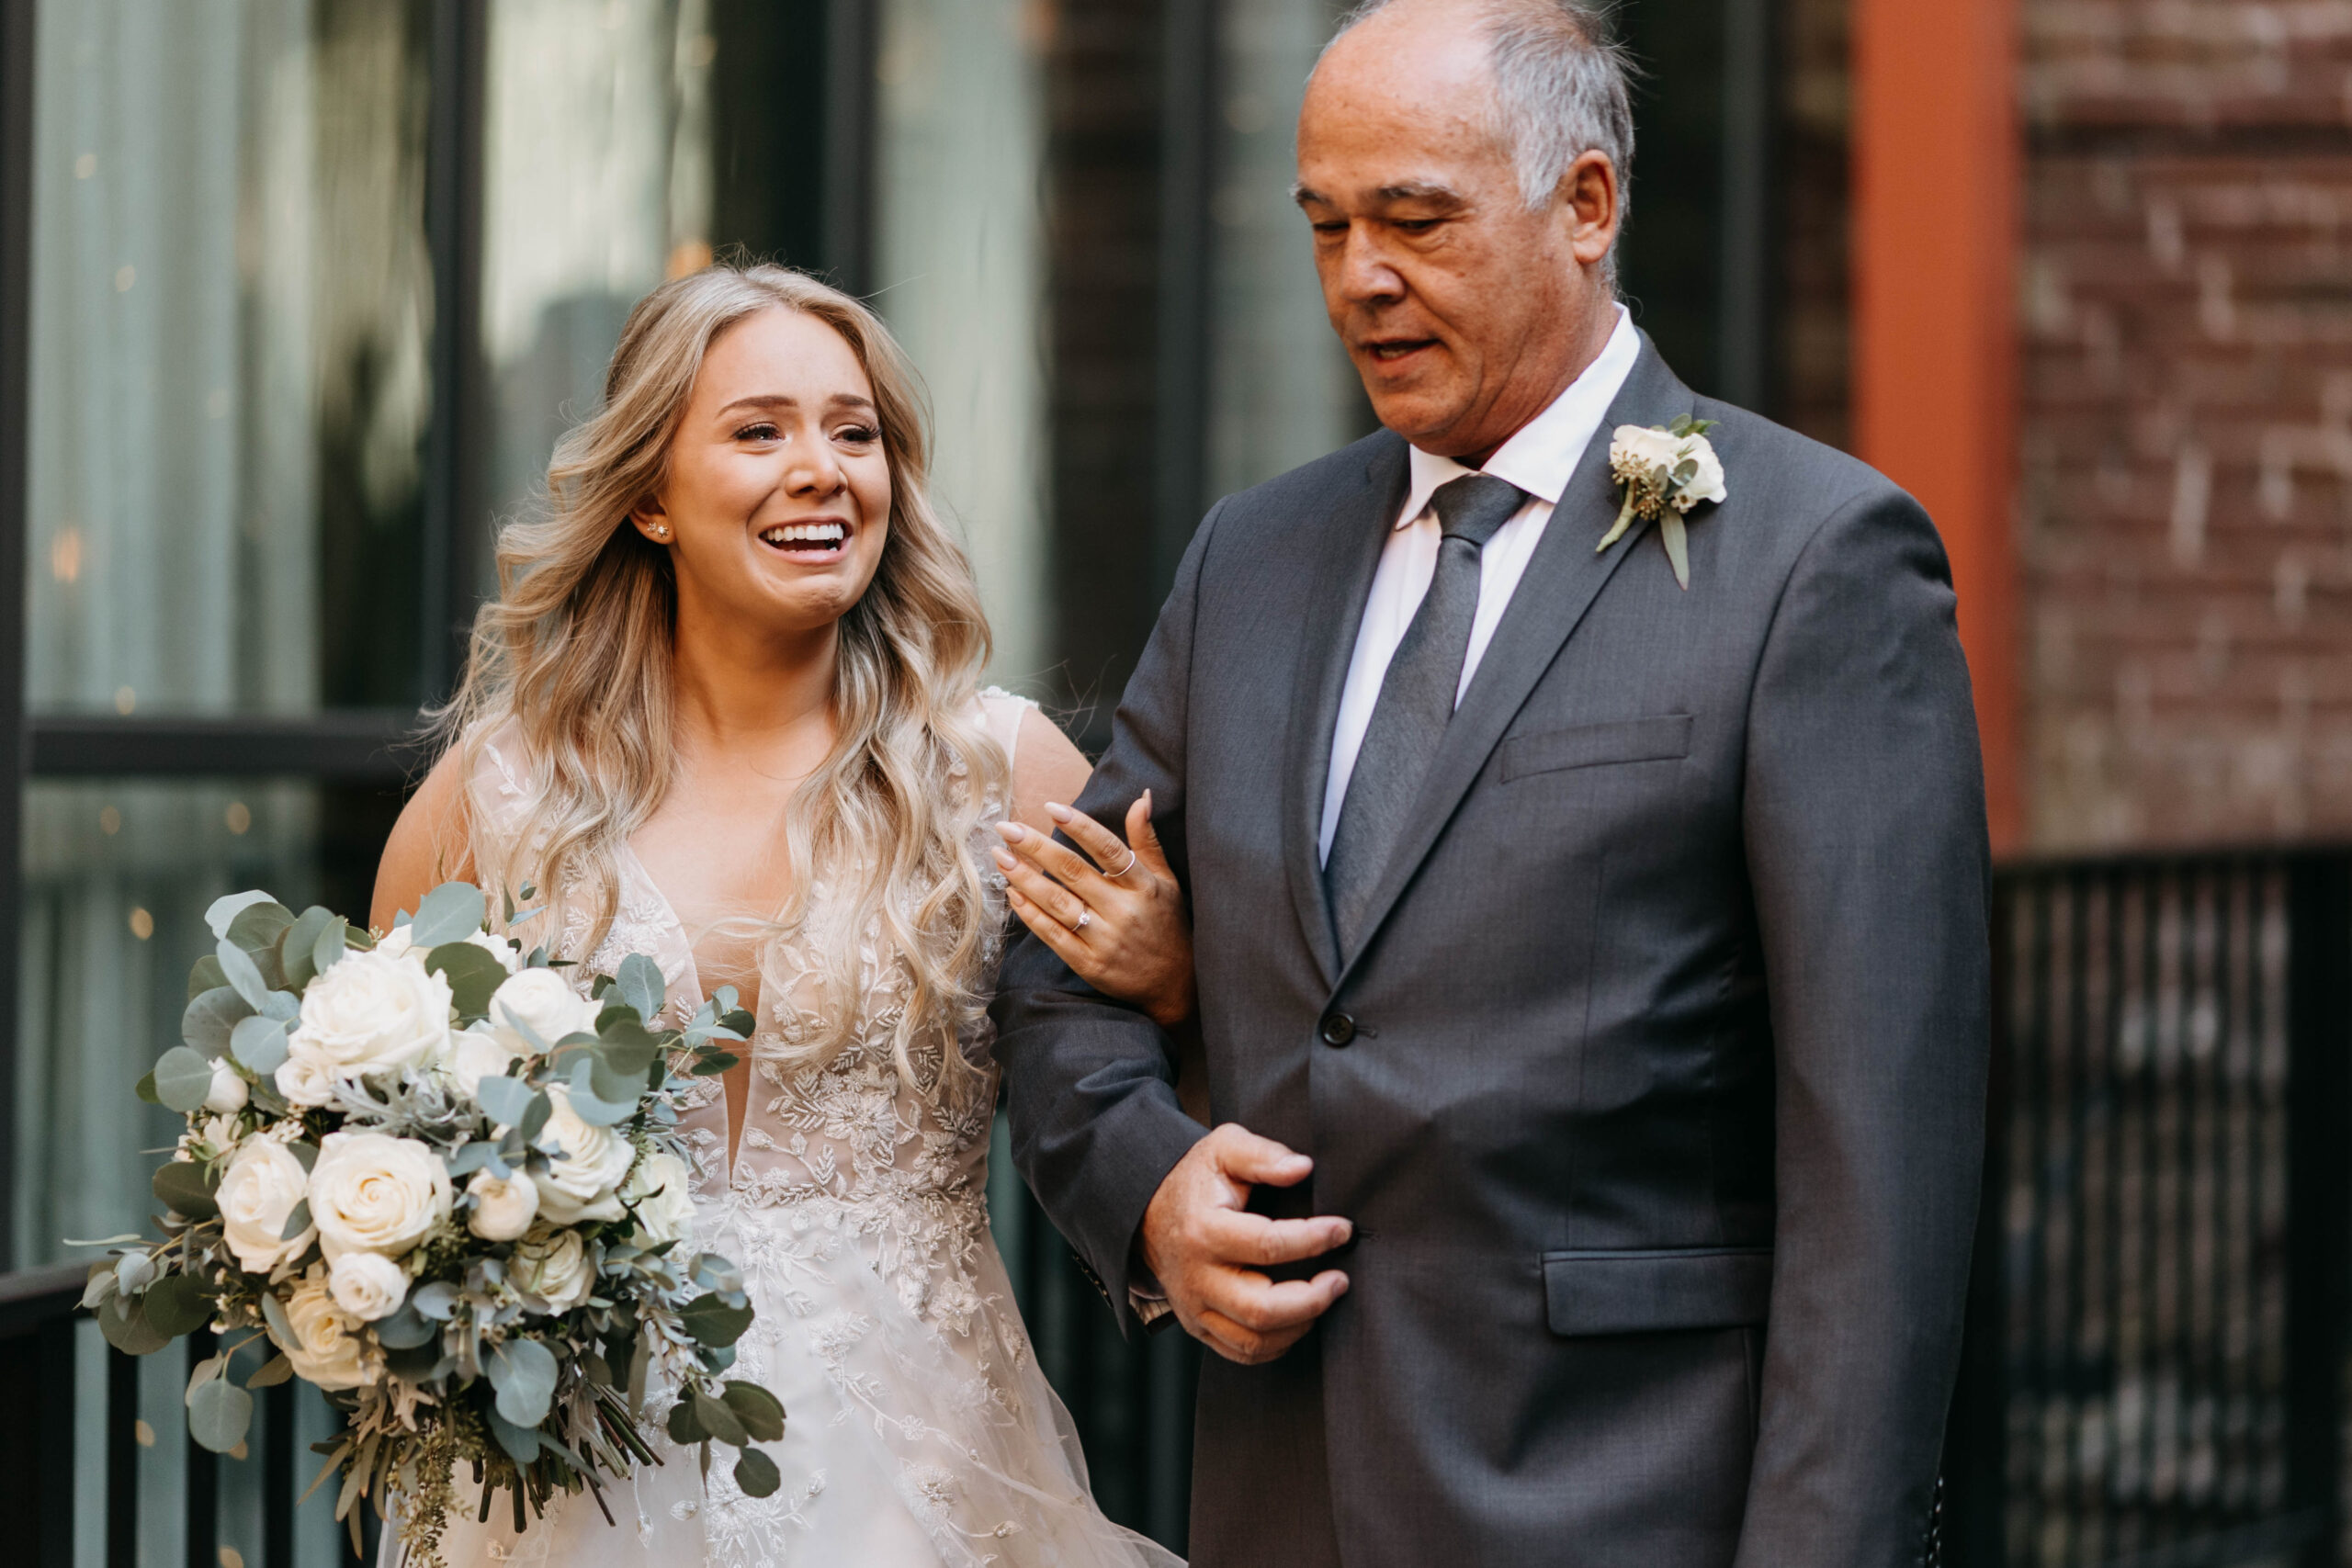 Bride's reaction to groom while walking down aisle. Documentary photograph of a wedding ceremony at Hotel covington courtyard.